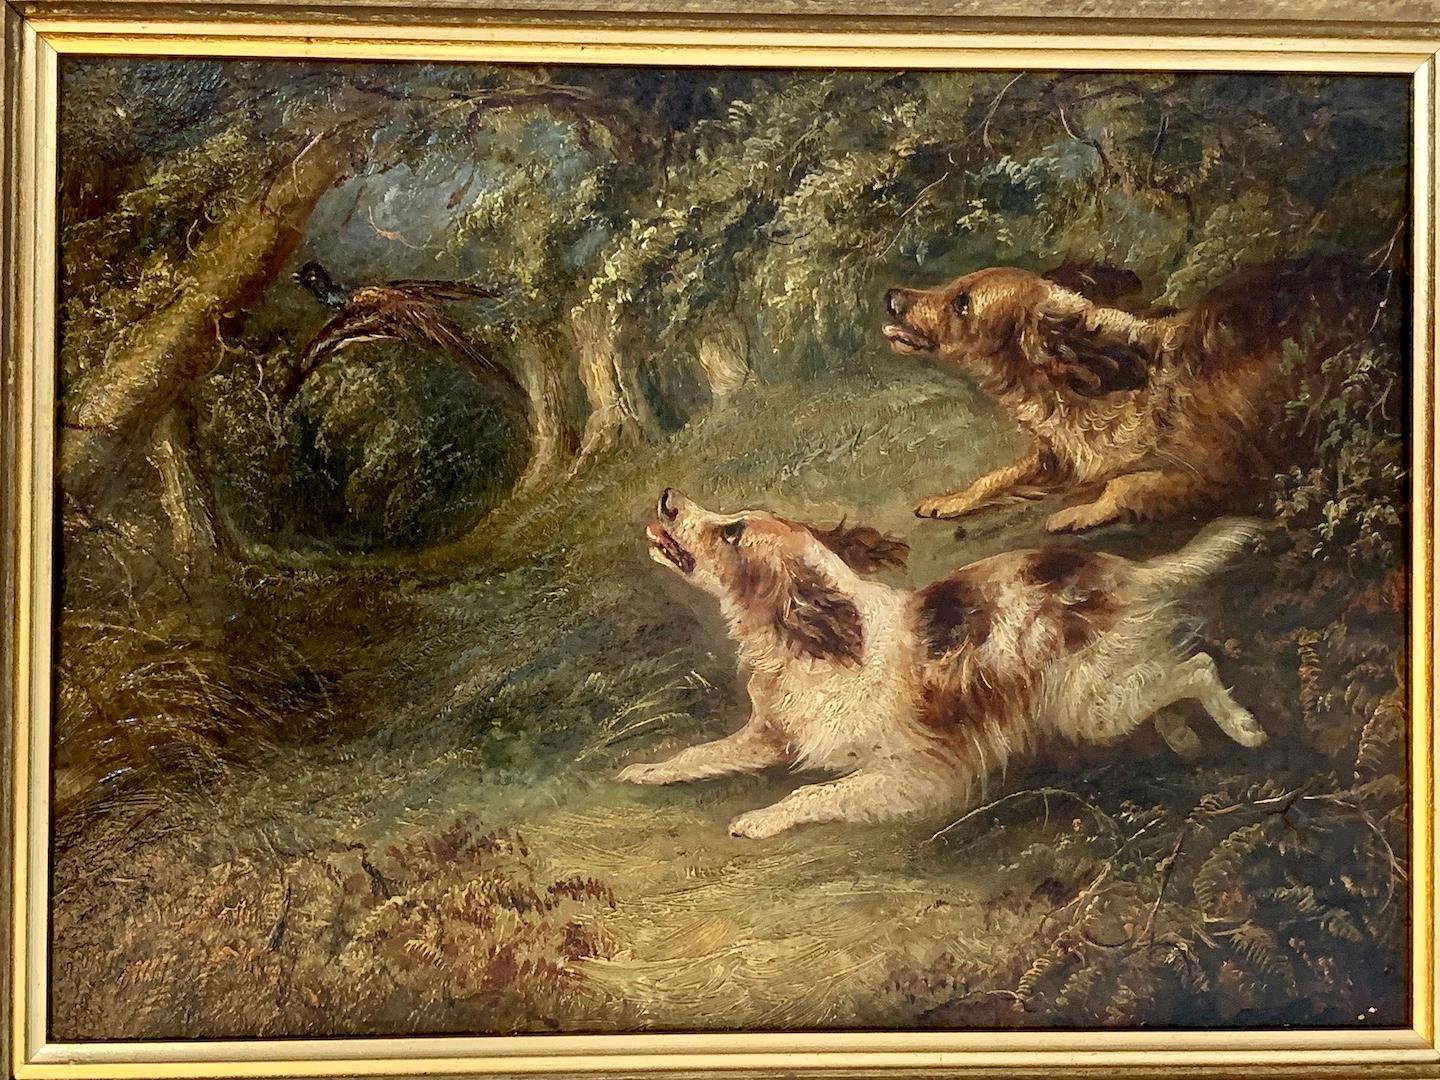 19th century English , two spaniel dogs chasing a Pheasant in a landscape 1